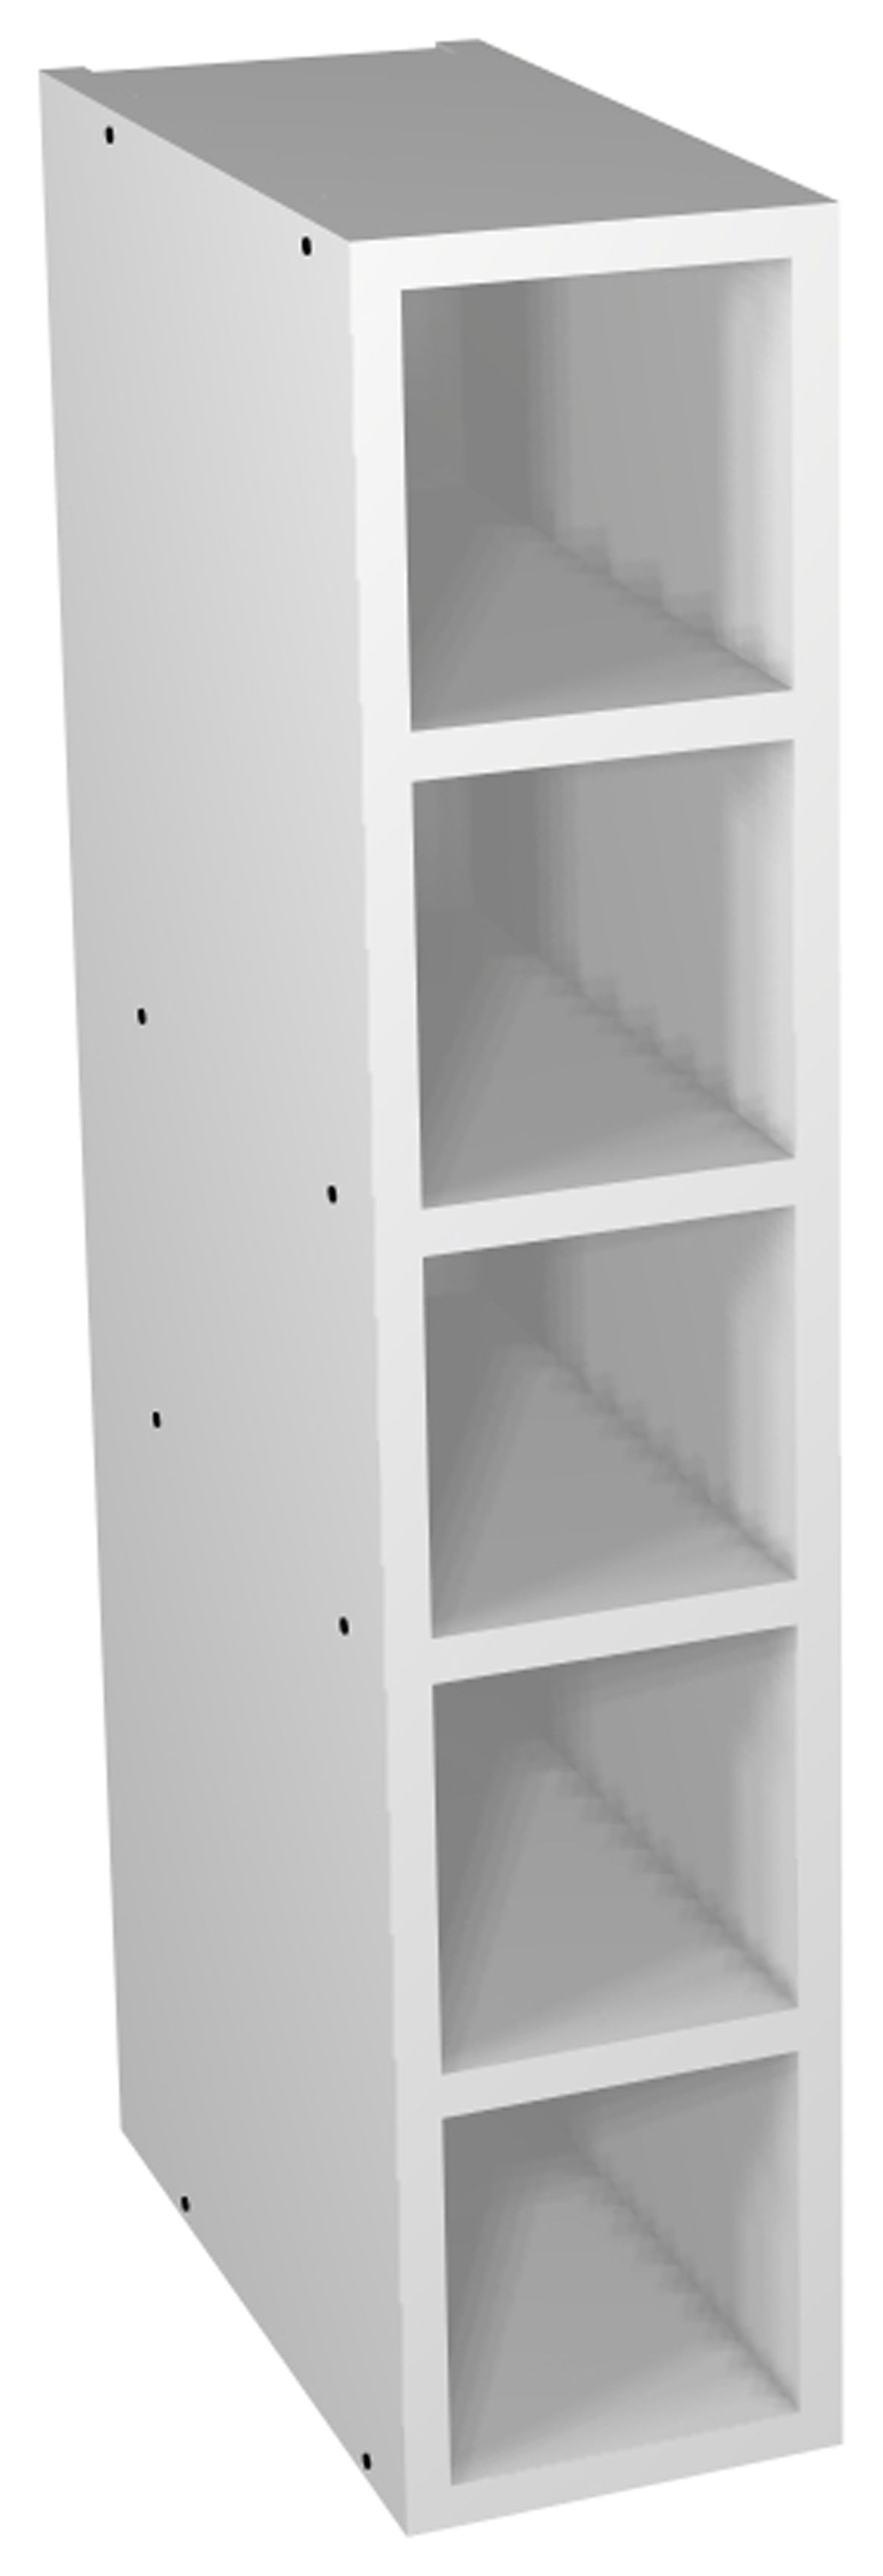 Wickes Fitted Furniture White Gloss Base/Wall Towel Storage Unit - 150 x 735mm